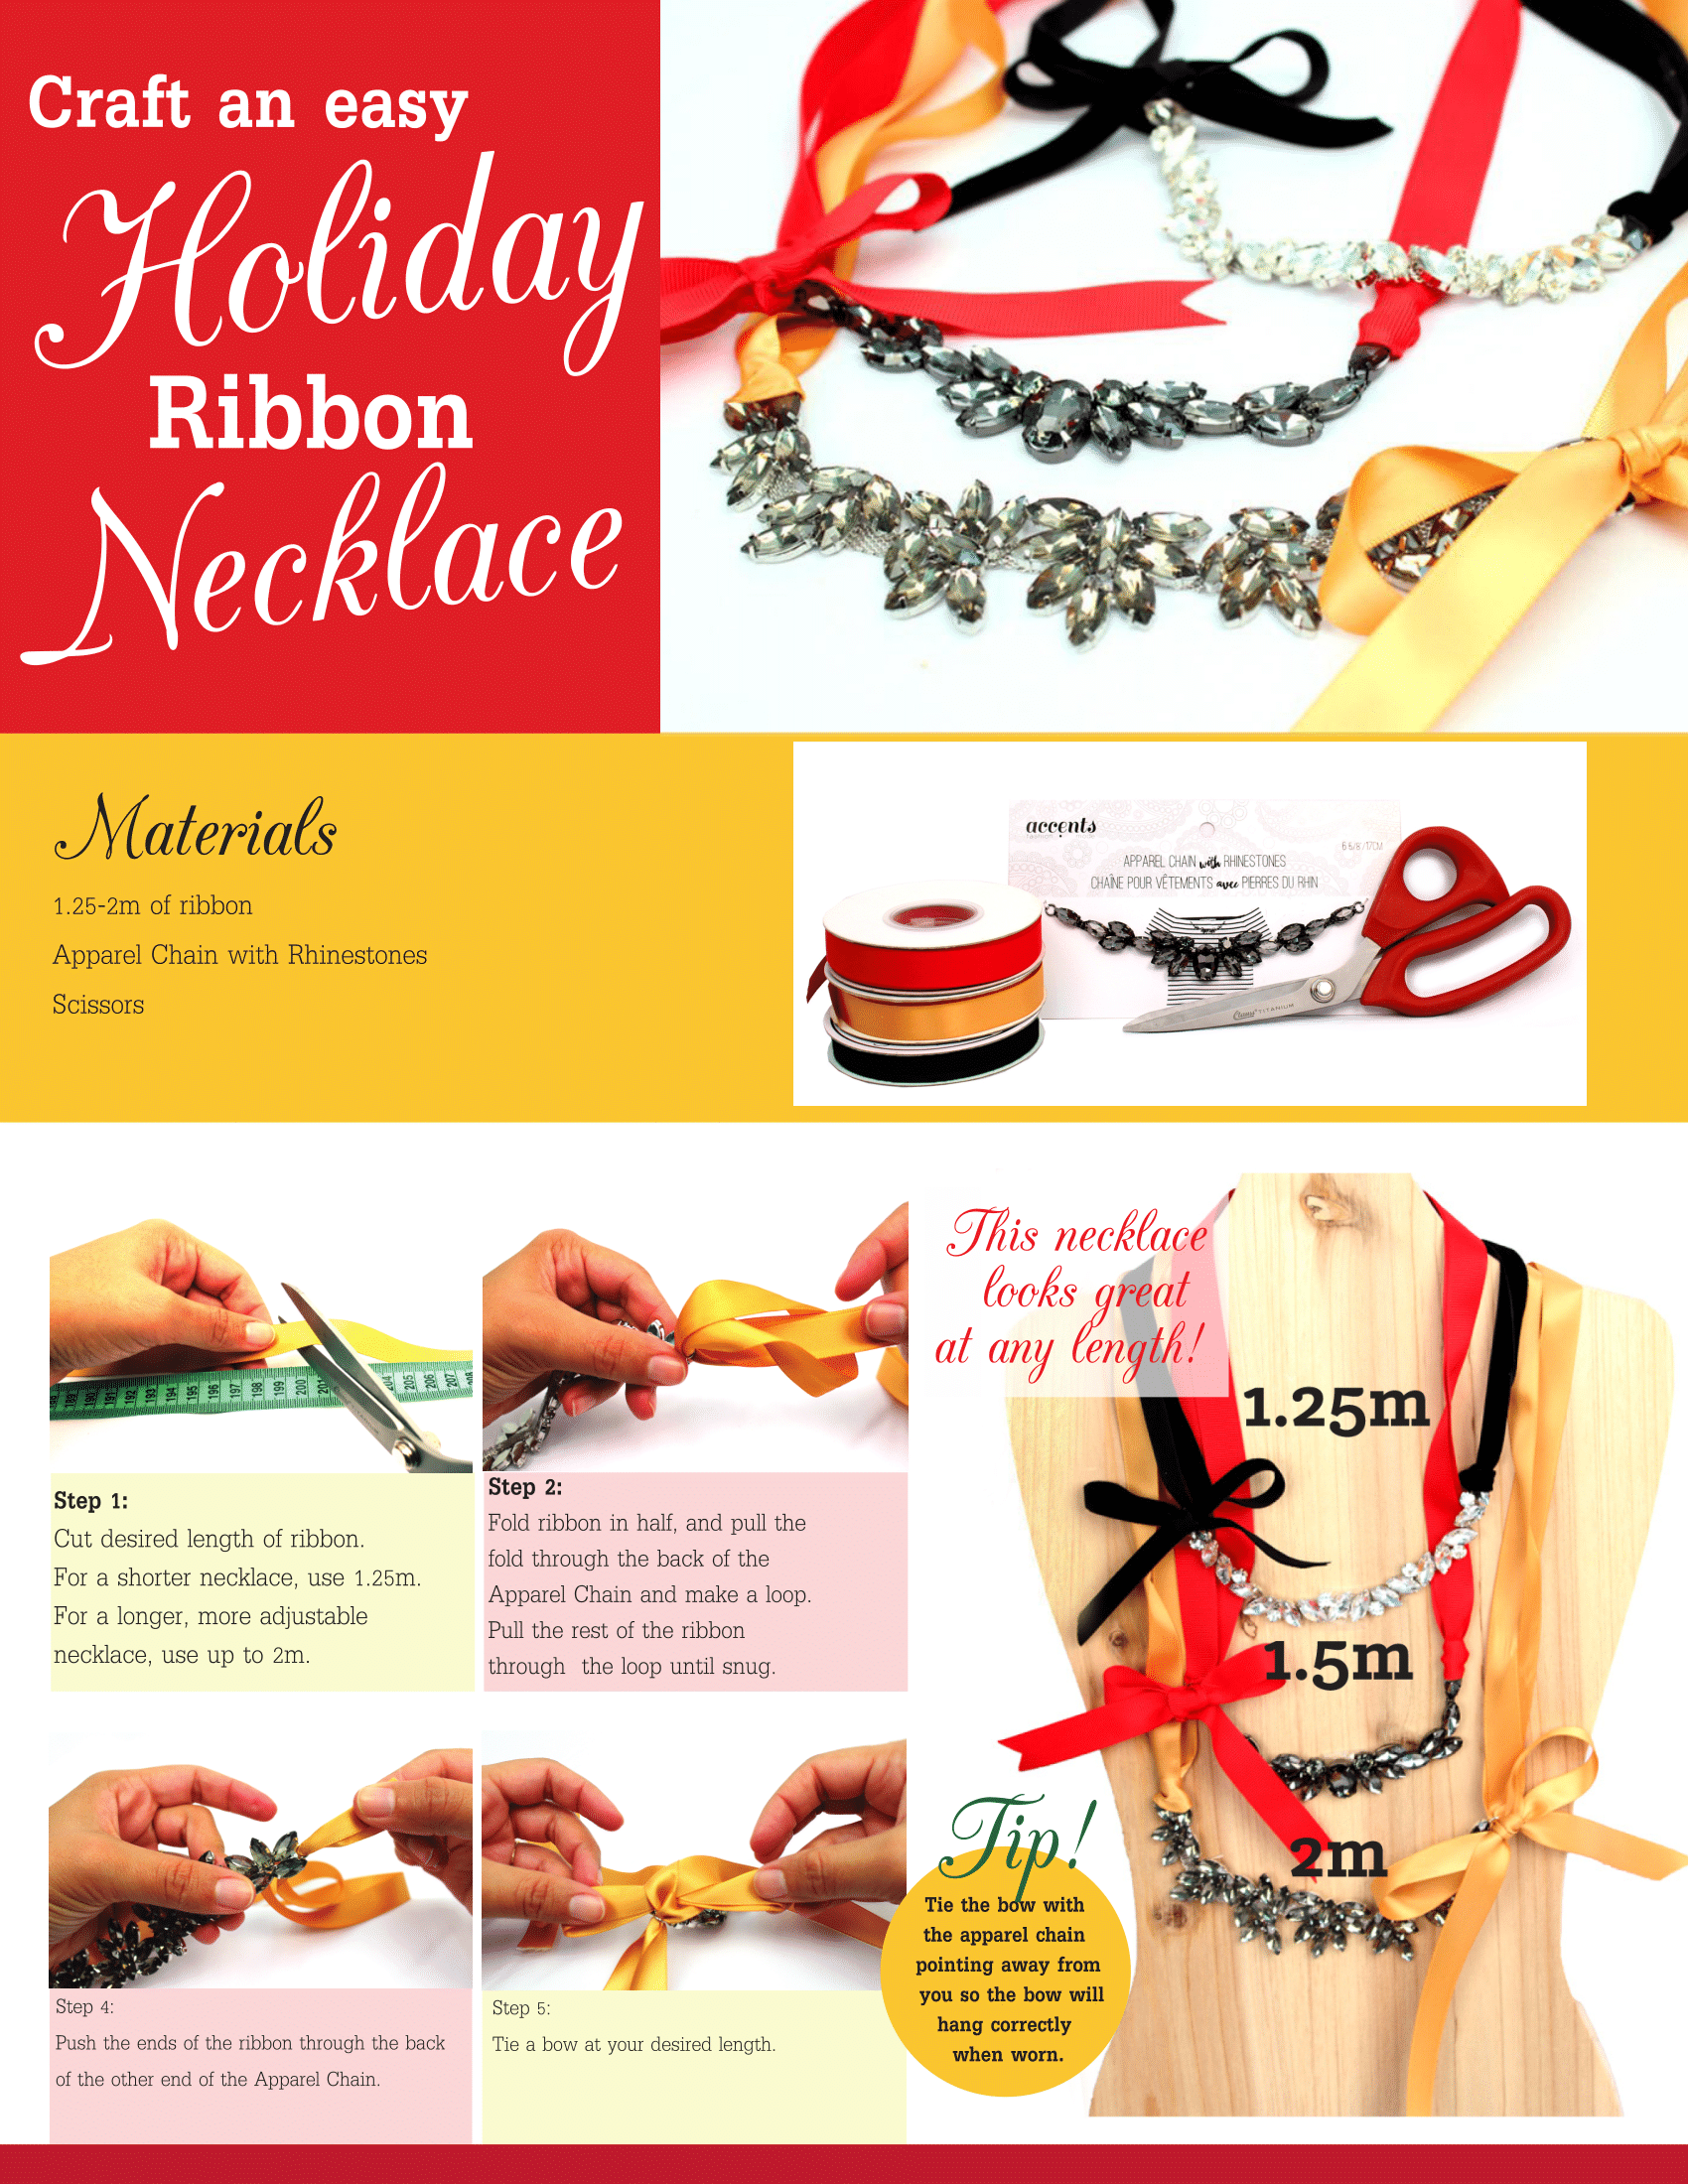 Required materials & steps to create a holiday ribbon necklace